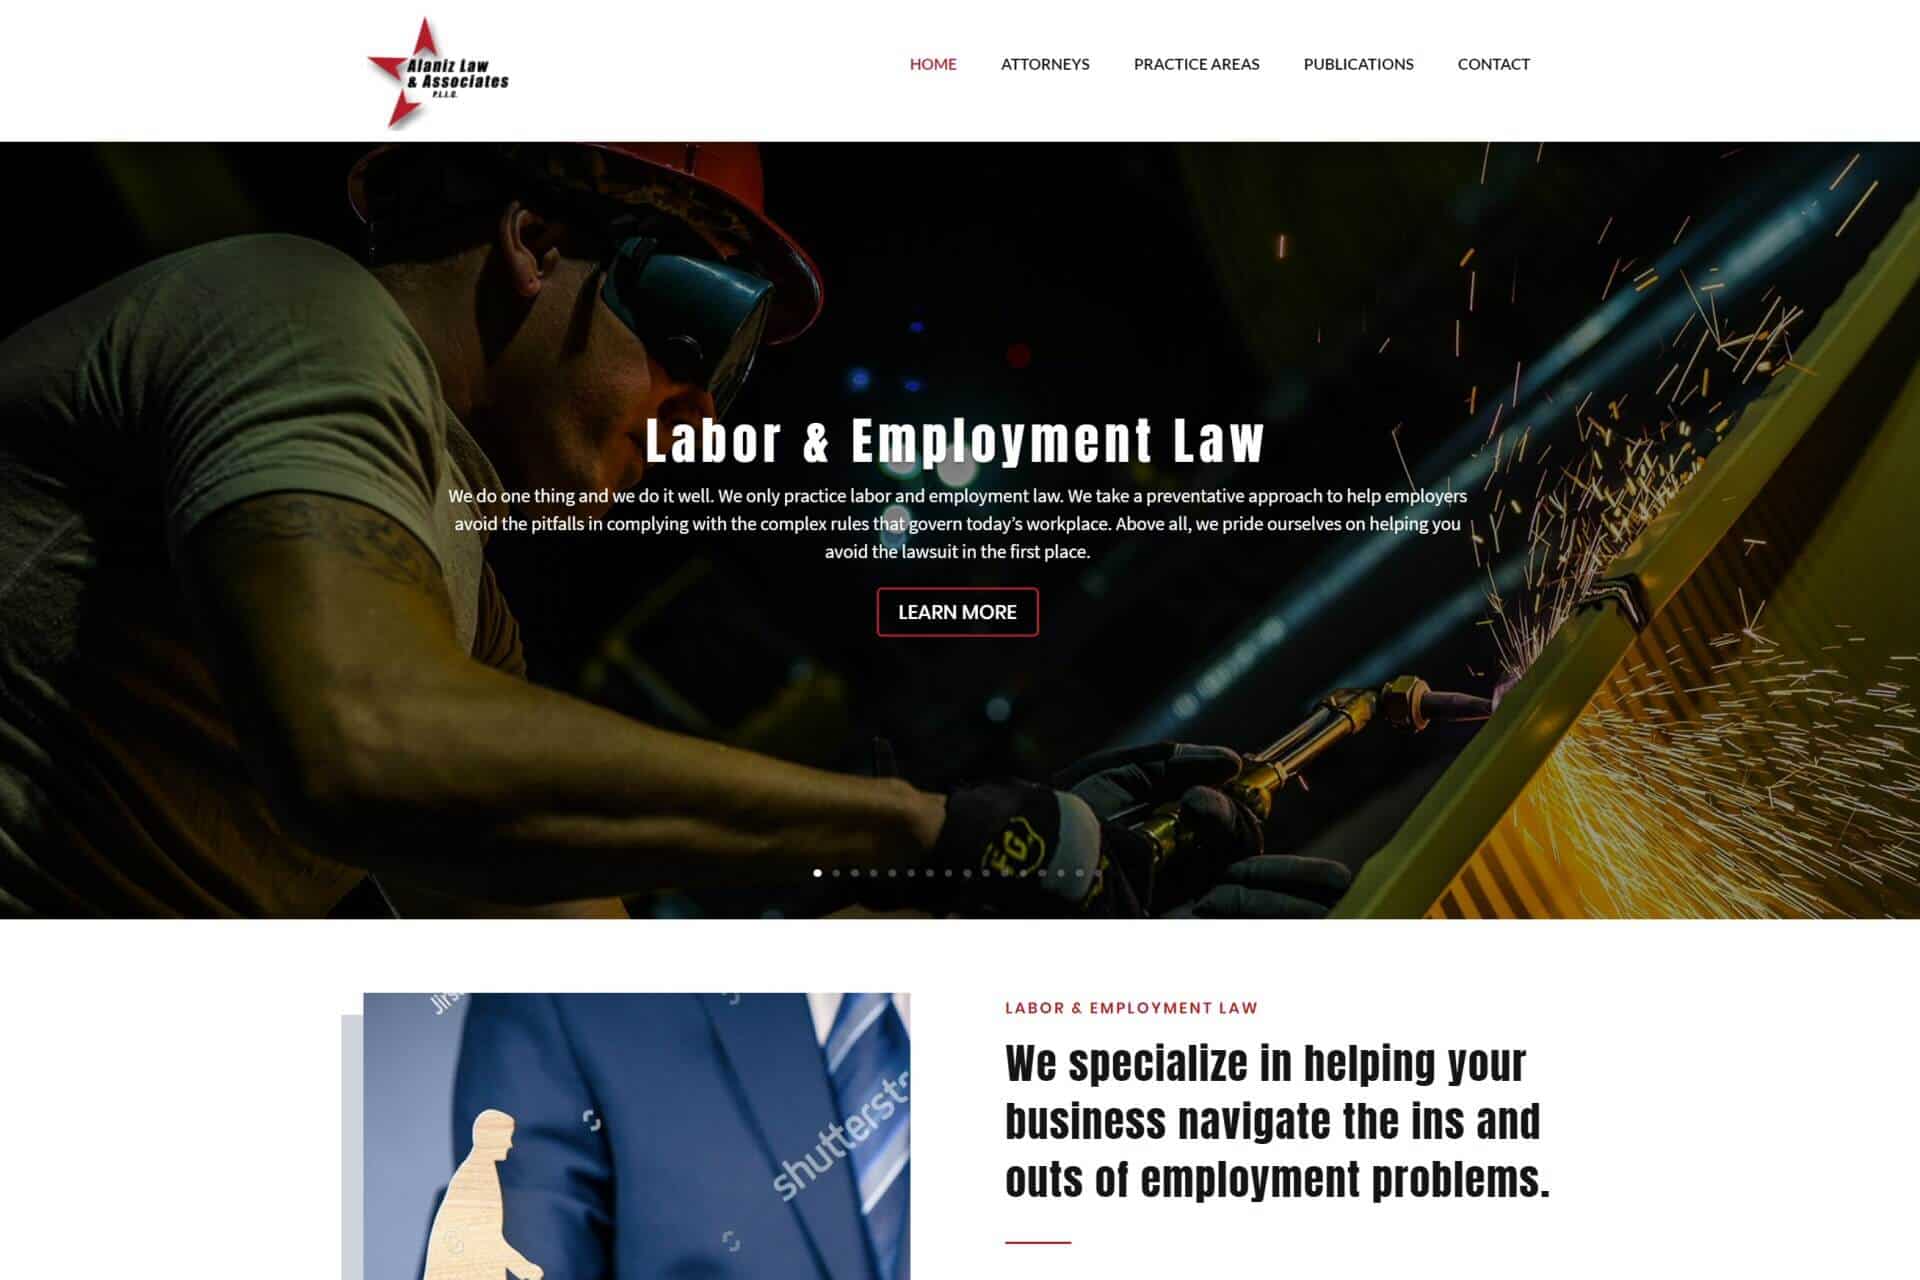 Alaniz Law and Associates by Derrico Financial Services